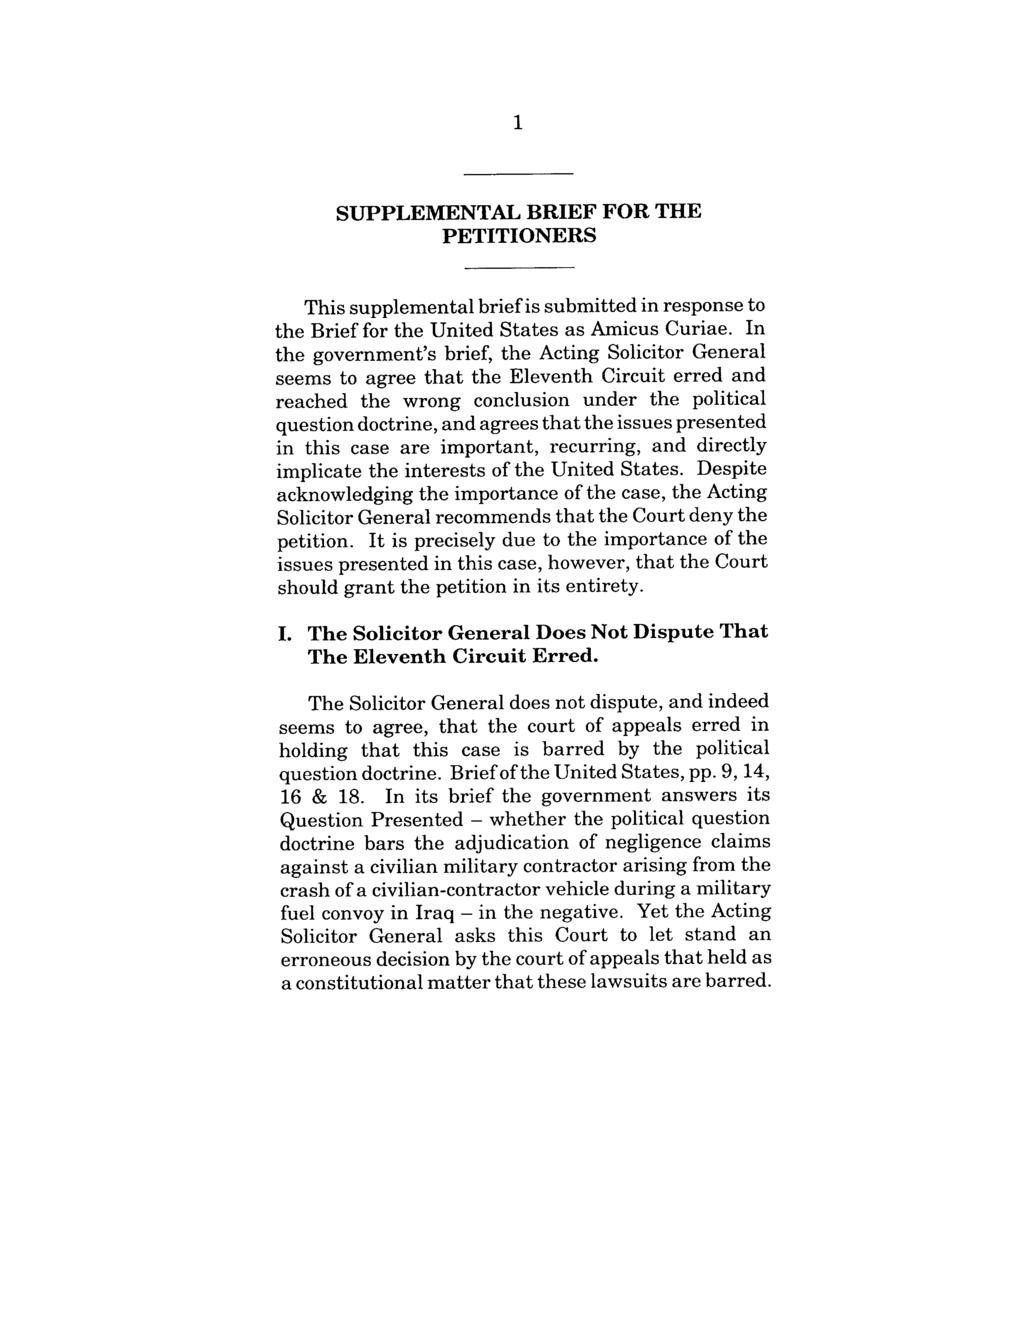 1 SUPPLEMENTAL BRIEF FOR THE PETITIONERS This supplemental brief is submitted in response to the Brief for the United States as Amicus Curiae.